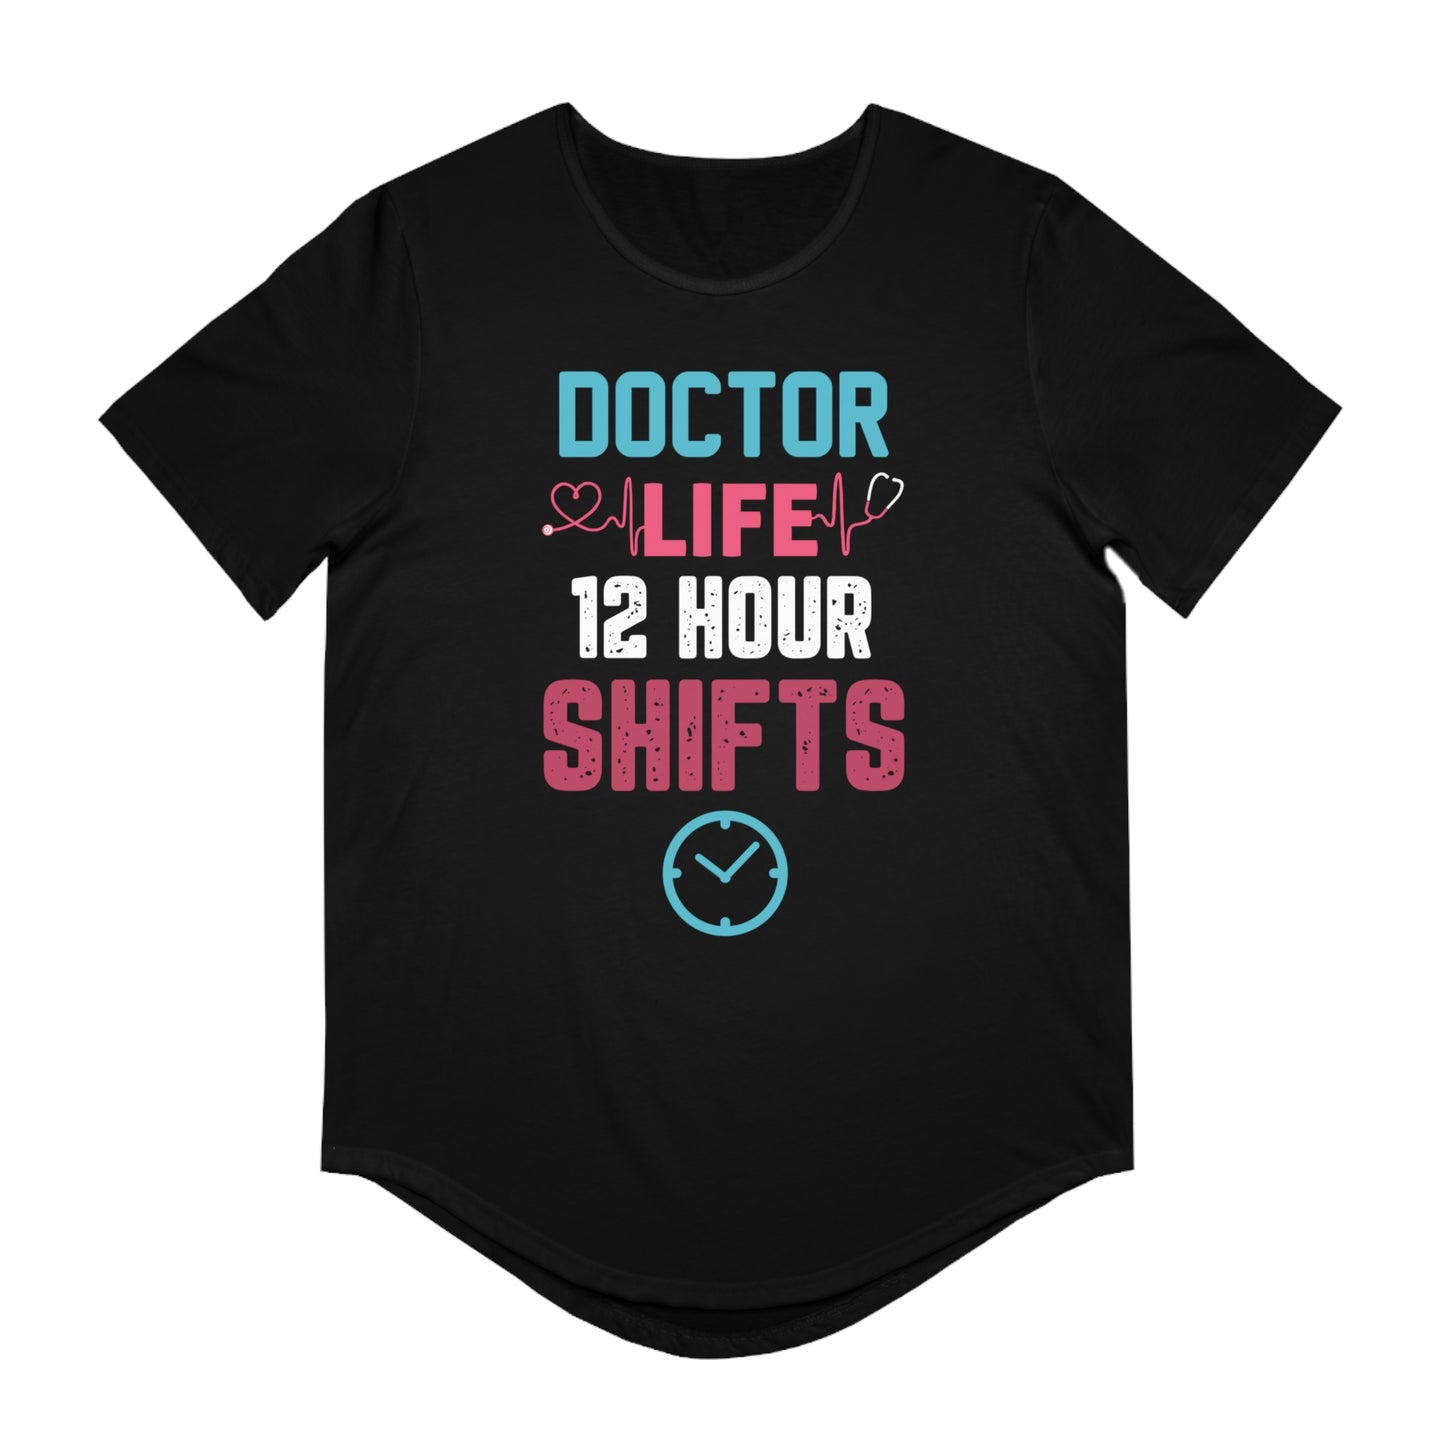 Doctor Life 12 Hour Shifts Men's Jersey Curved Hem Tee, Doctor shirts, Doctor gift ideas, New Doctor shirt, doctors gift, Doctor team shirt